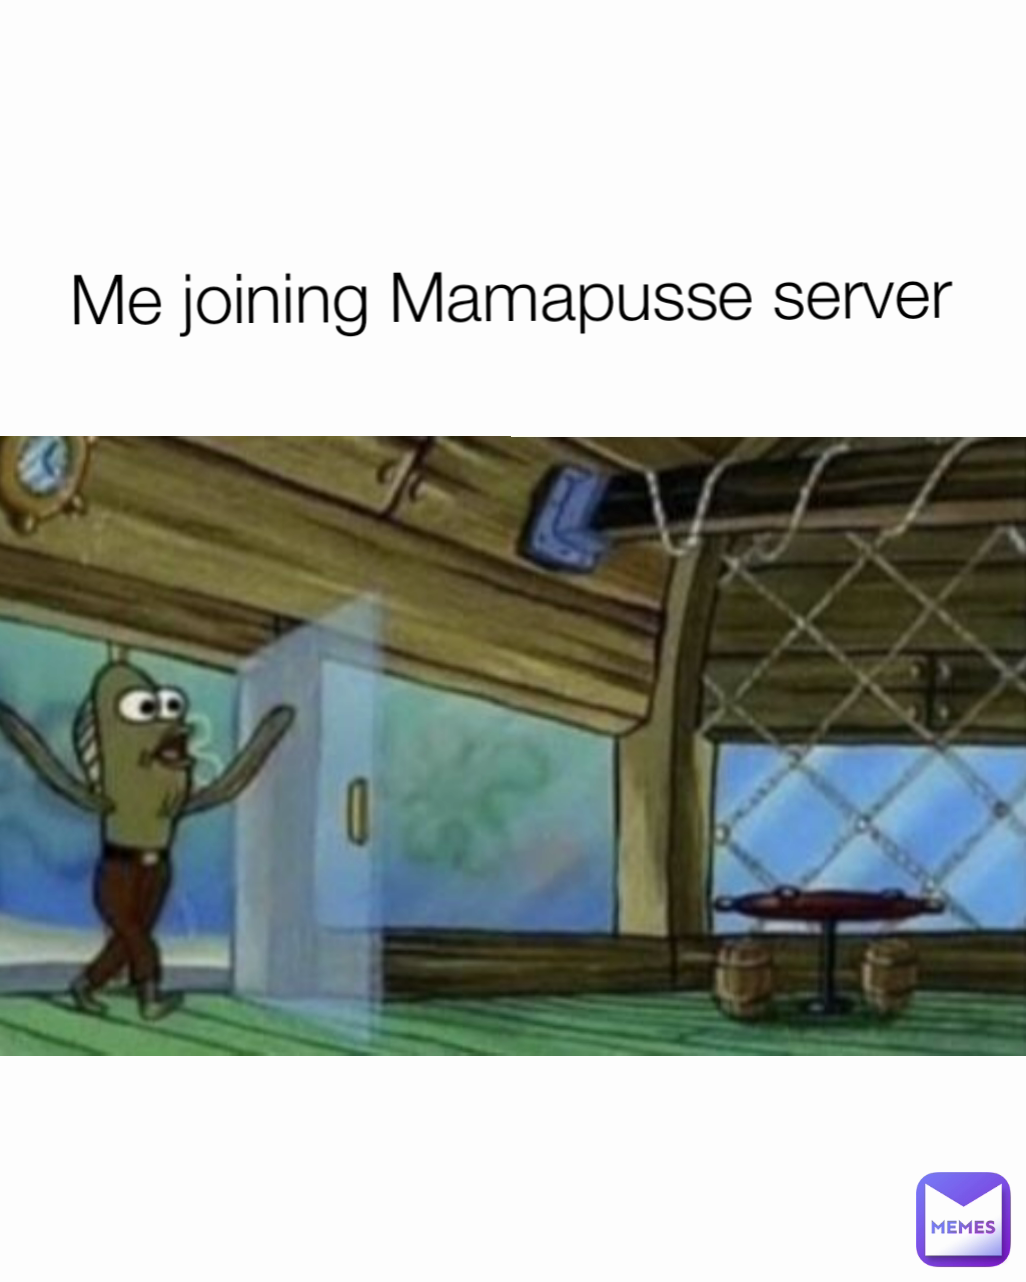 Me joining Mamapusse server